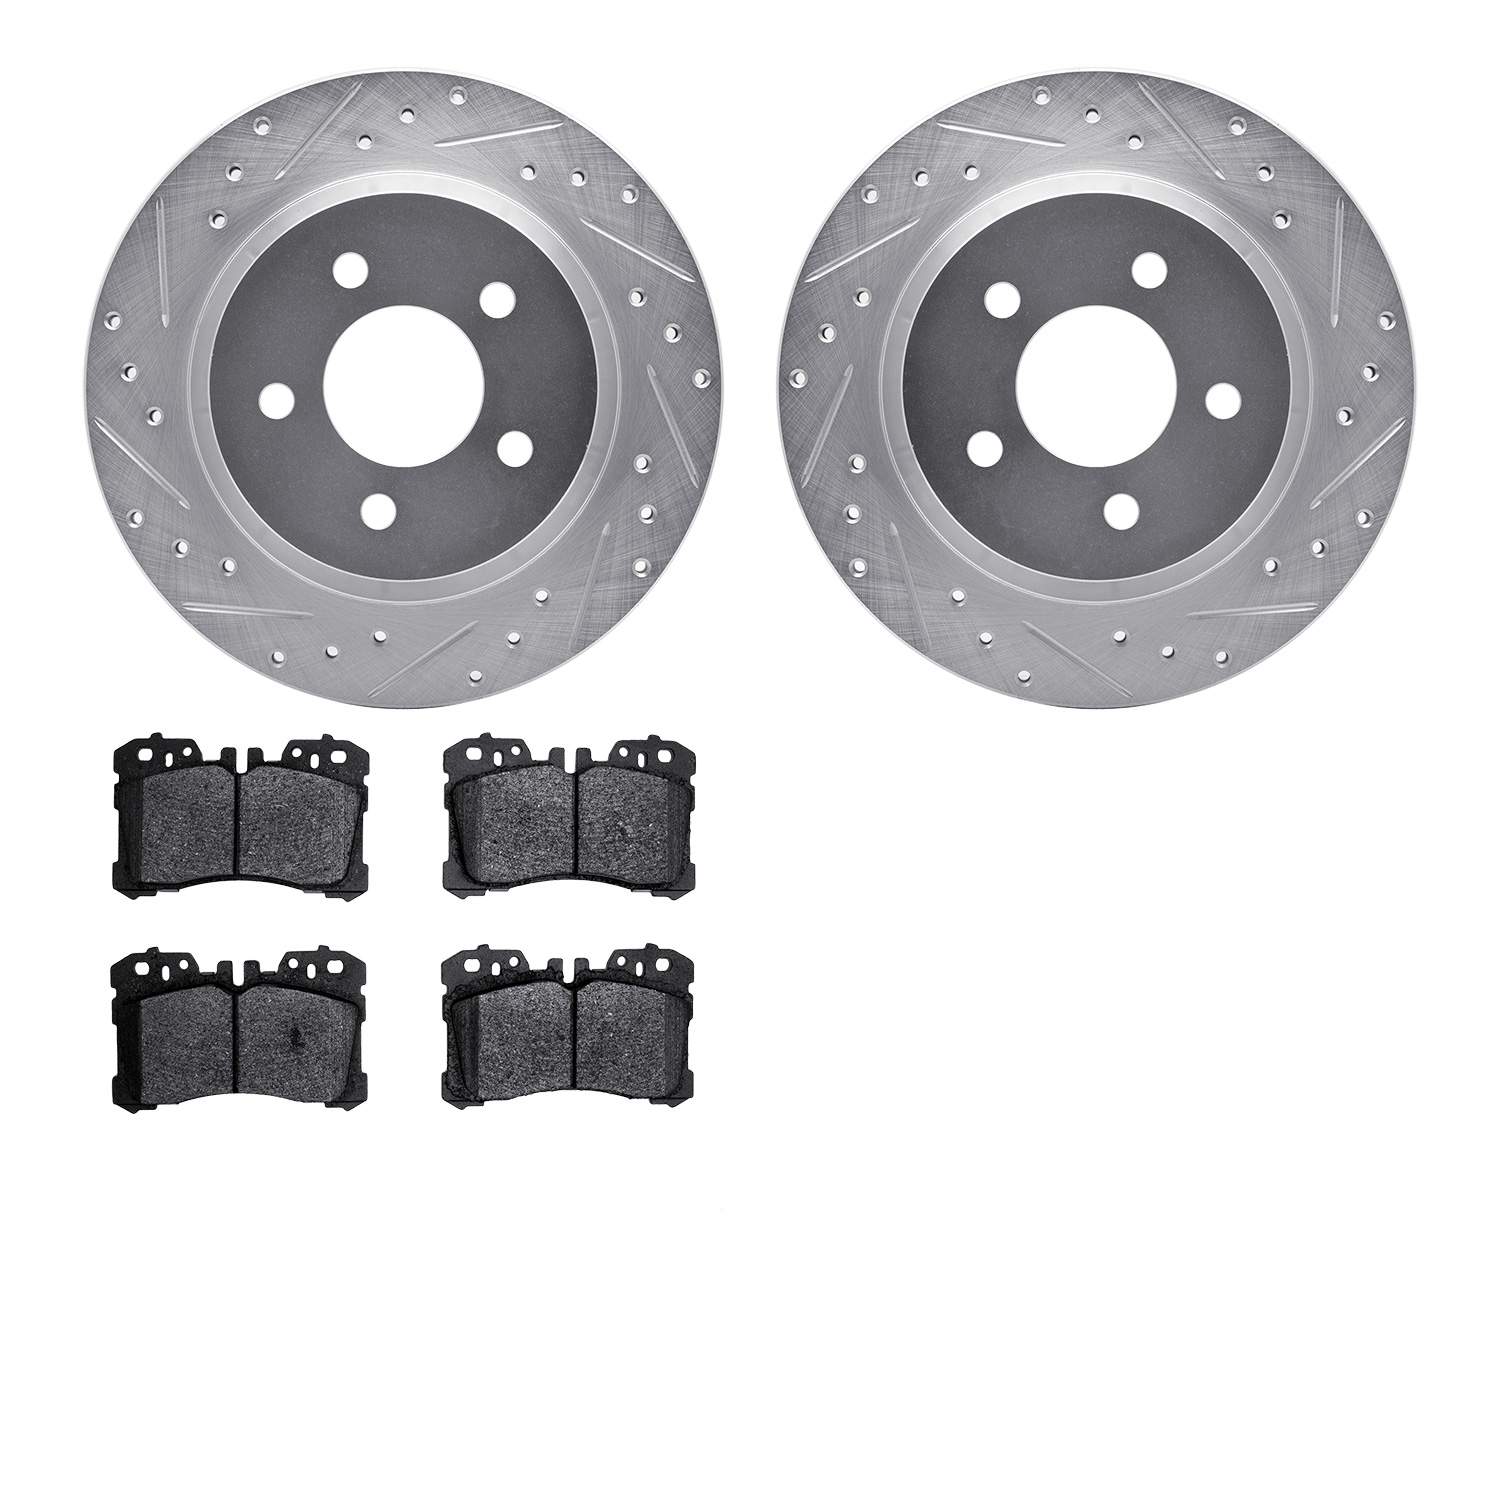 7302-75024 Drilled/Slotted Brake Rotor with 3000-Series Ceramic Brake Pads Kit [Silver], Fits Select Lexus/Toyota/Scion, Positio